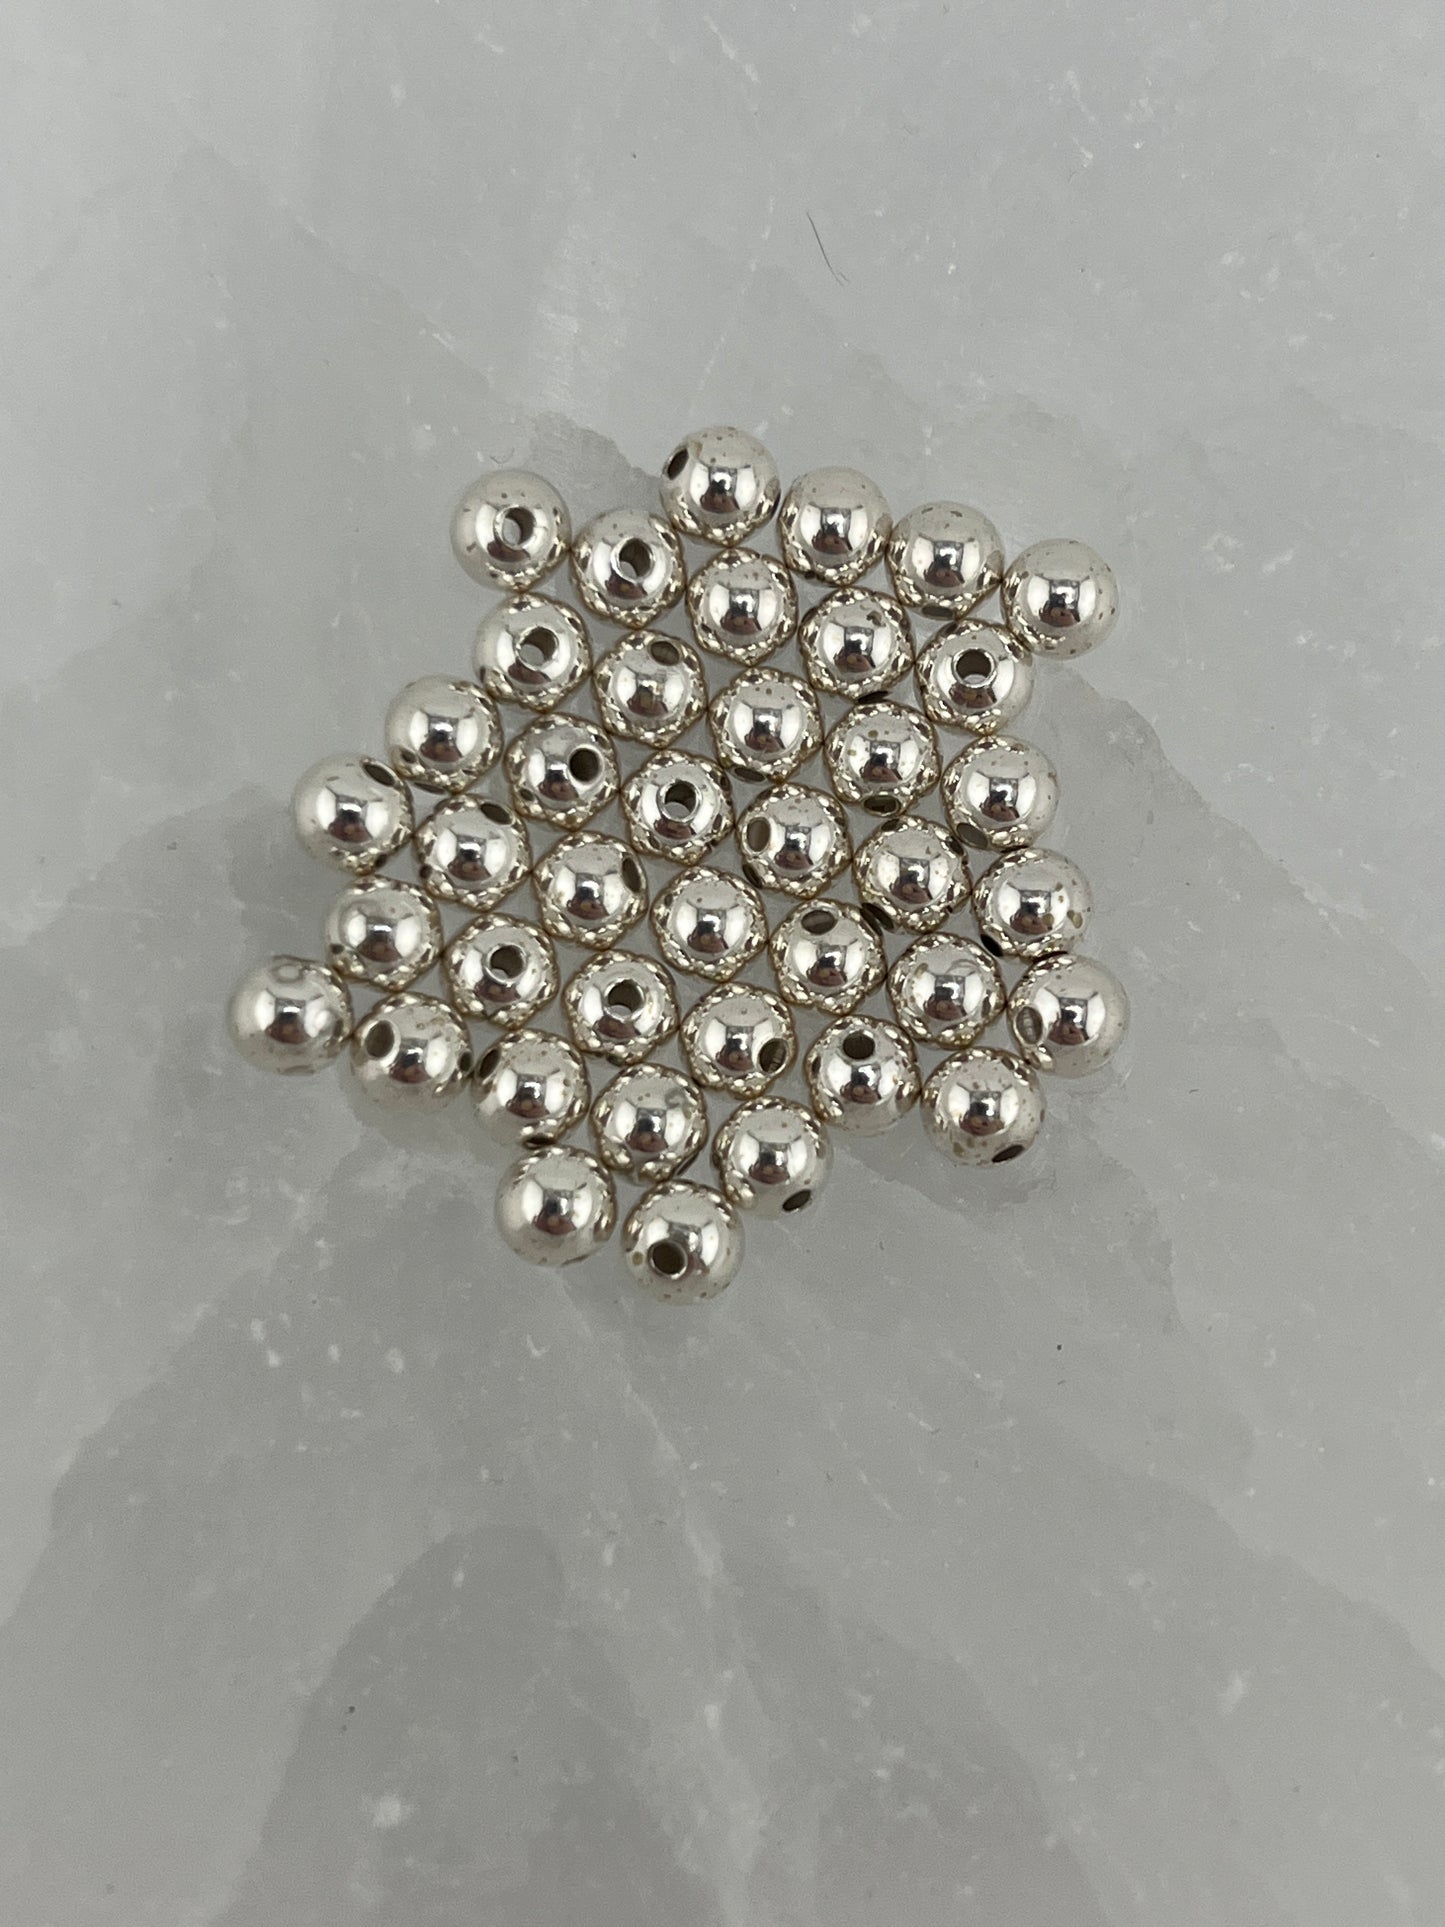 S.S. 5mm Spacers Bead Sets (40 pc)